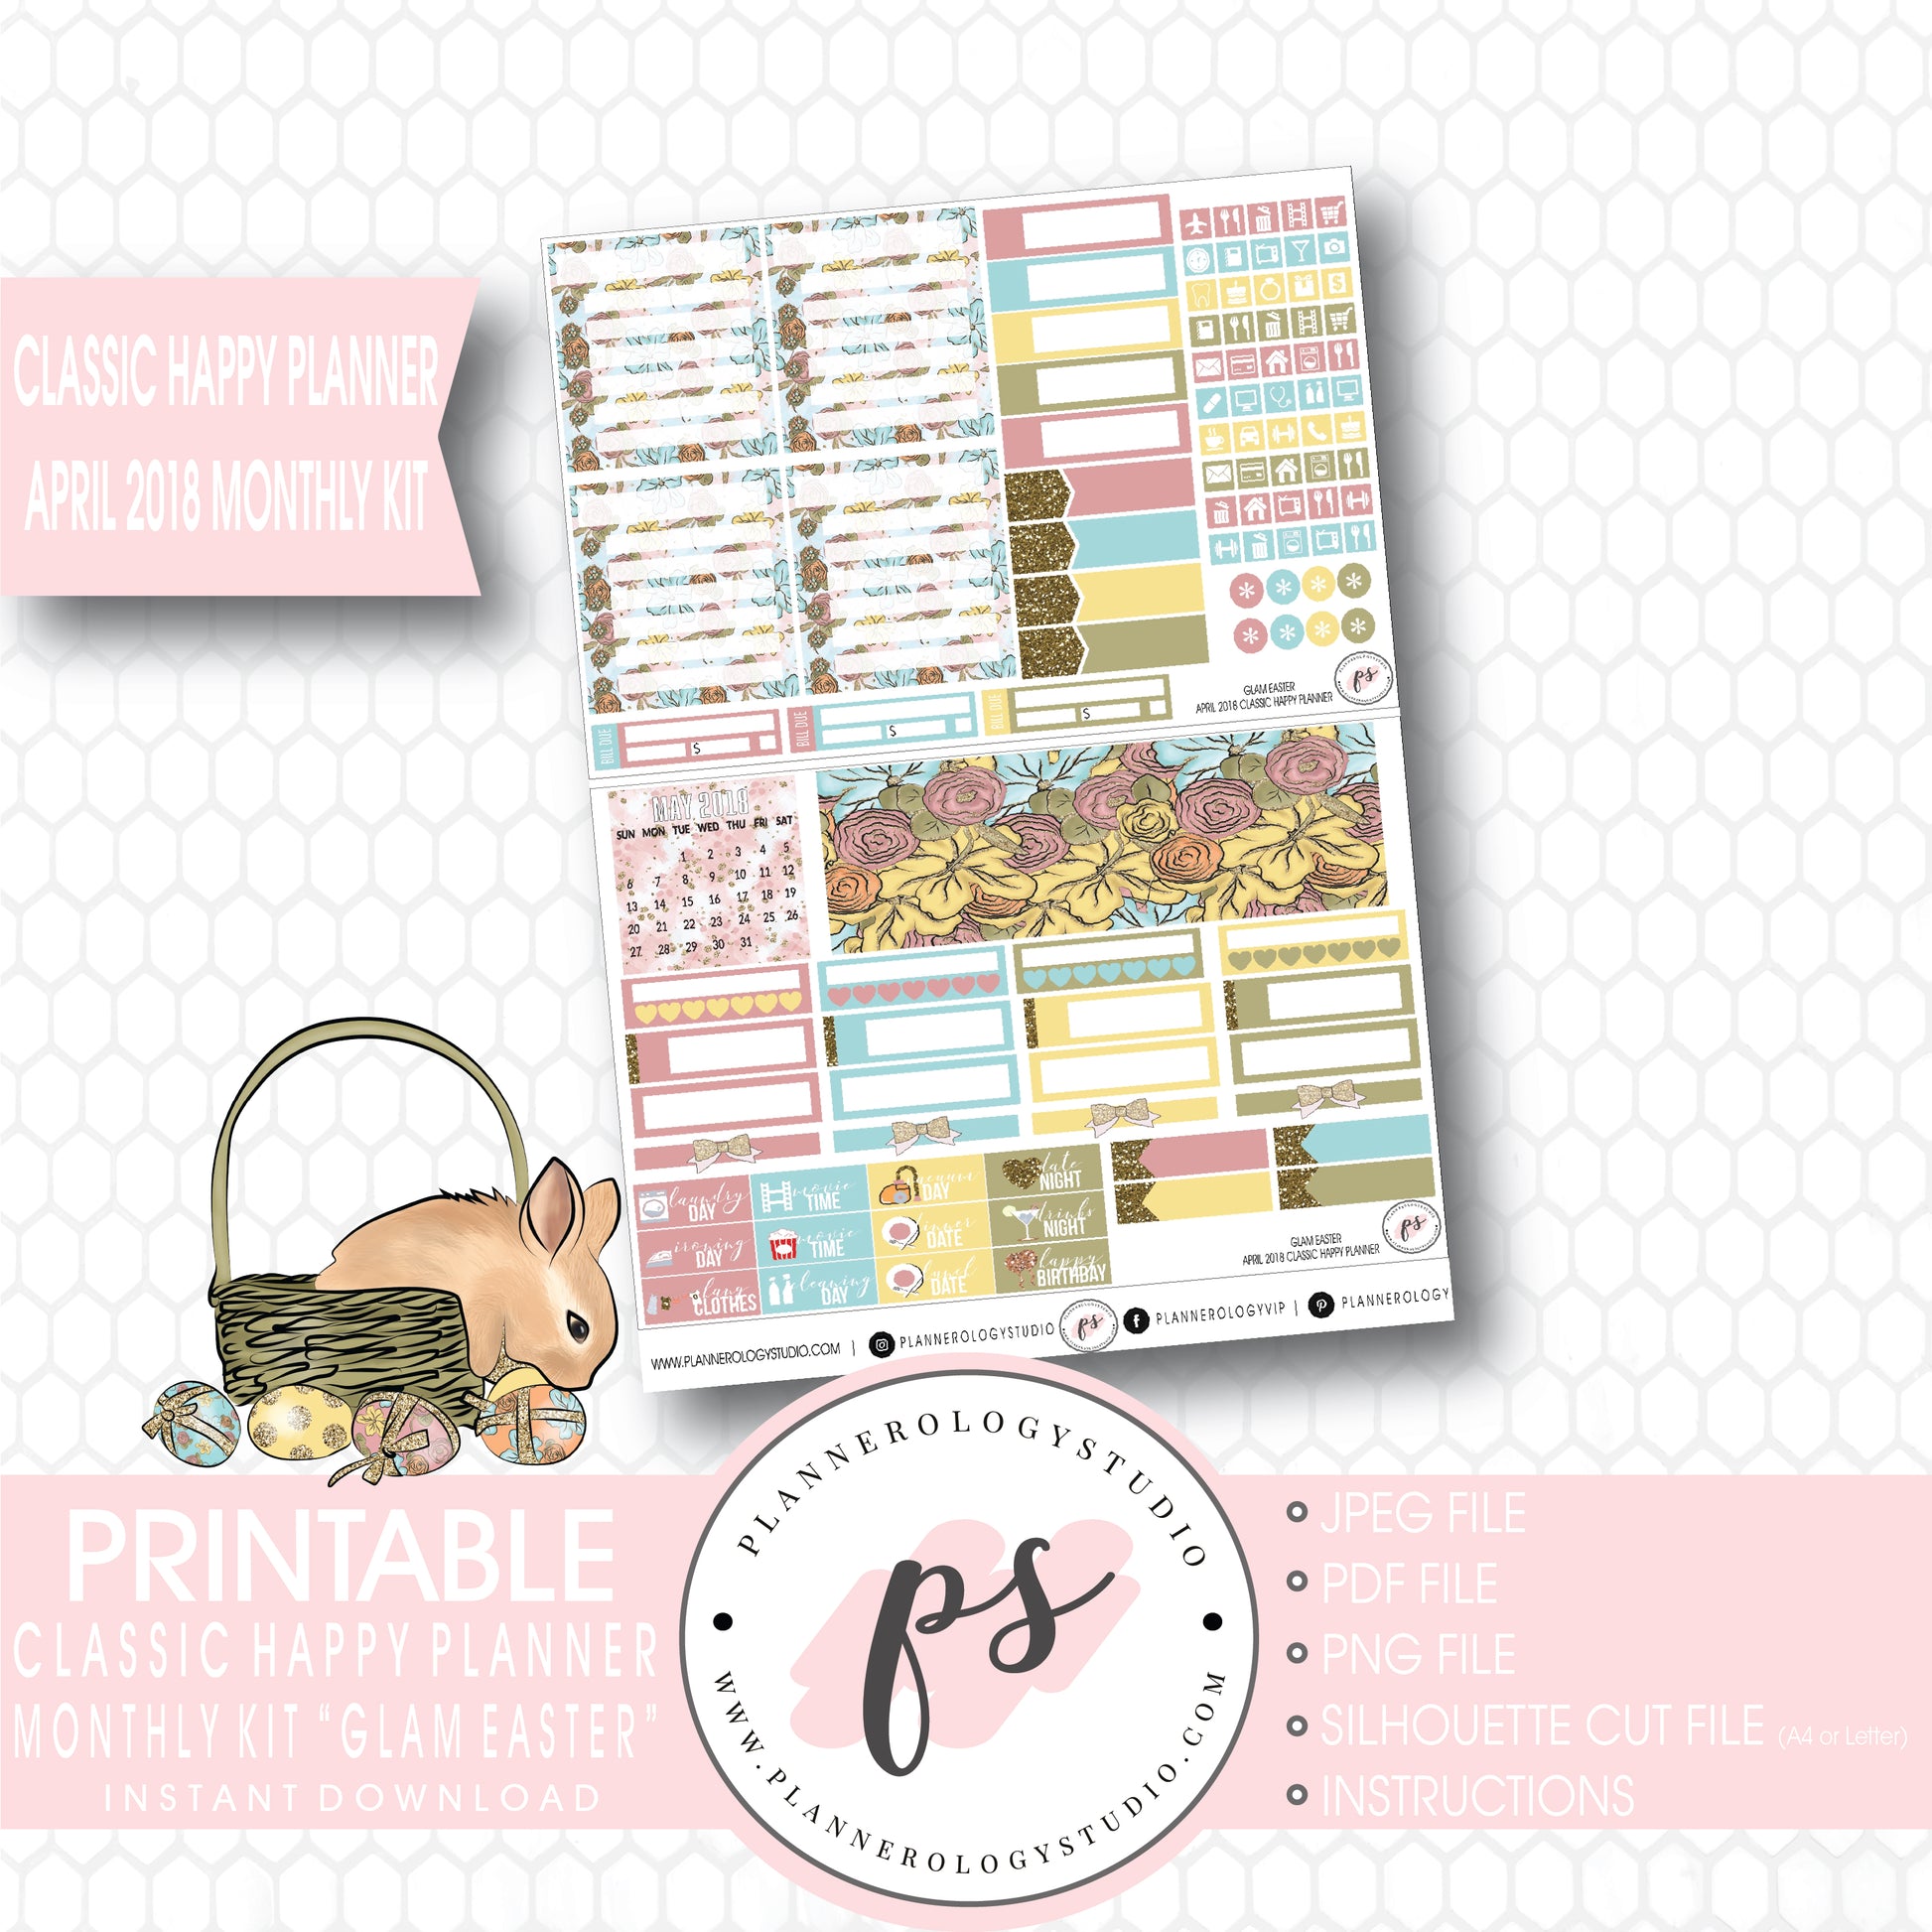 Glam Easter April 2018 Monthly View Kit Digital Printable Planner Stickers (for use with Classic Happy Planner) - Plannerologystudio